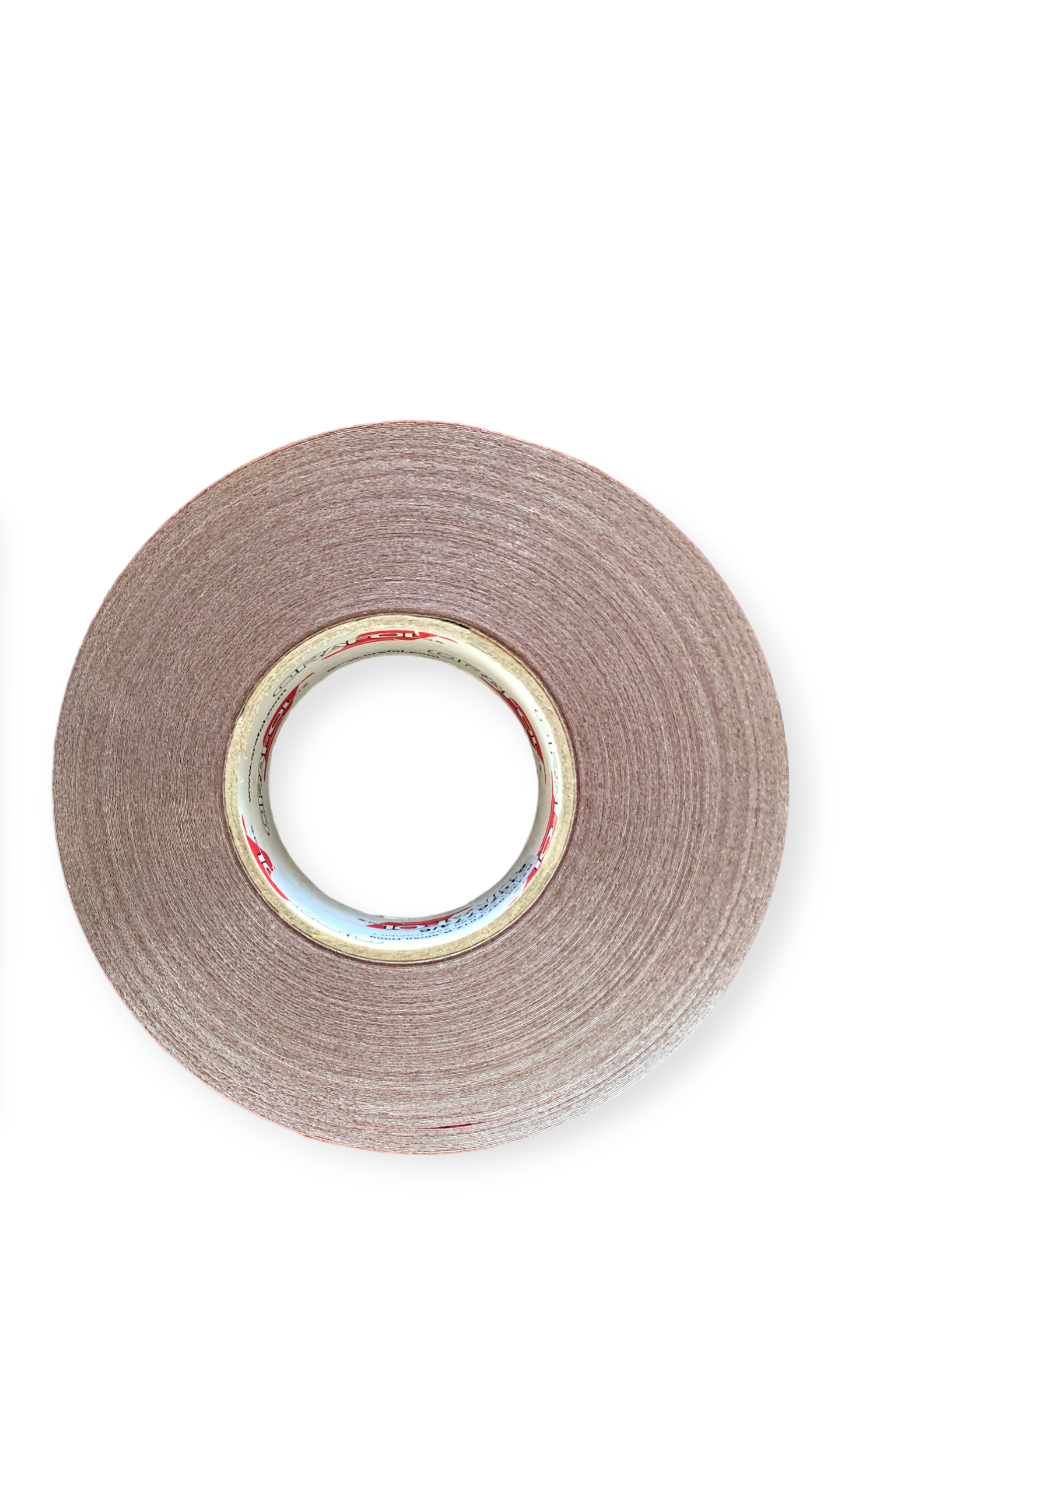 Red Segmented Conspicuity Tape Ece 104